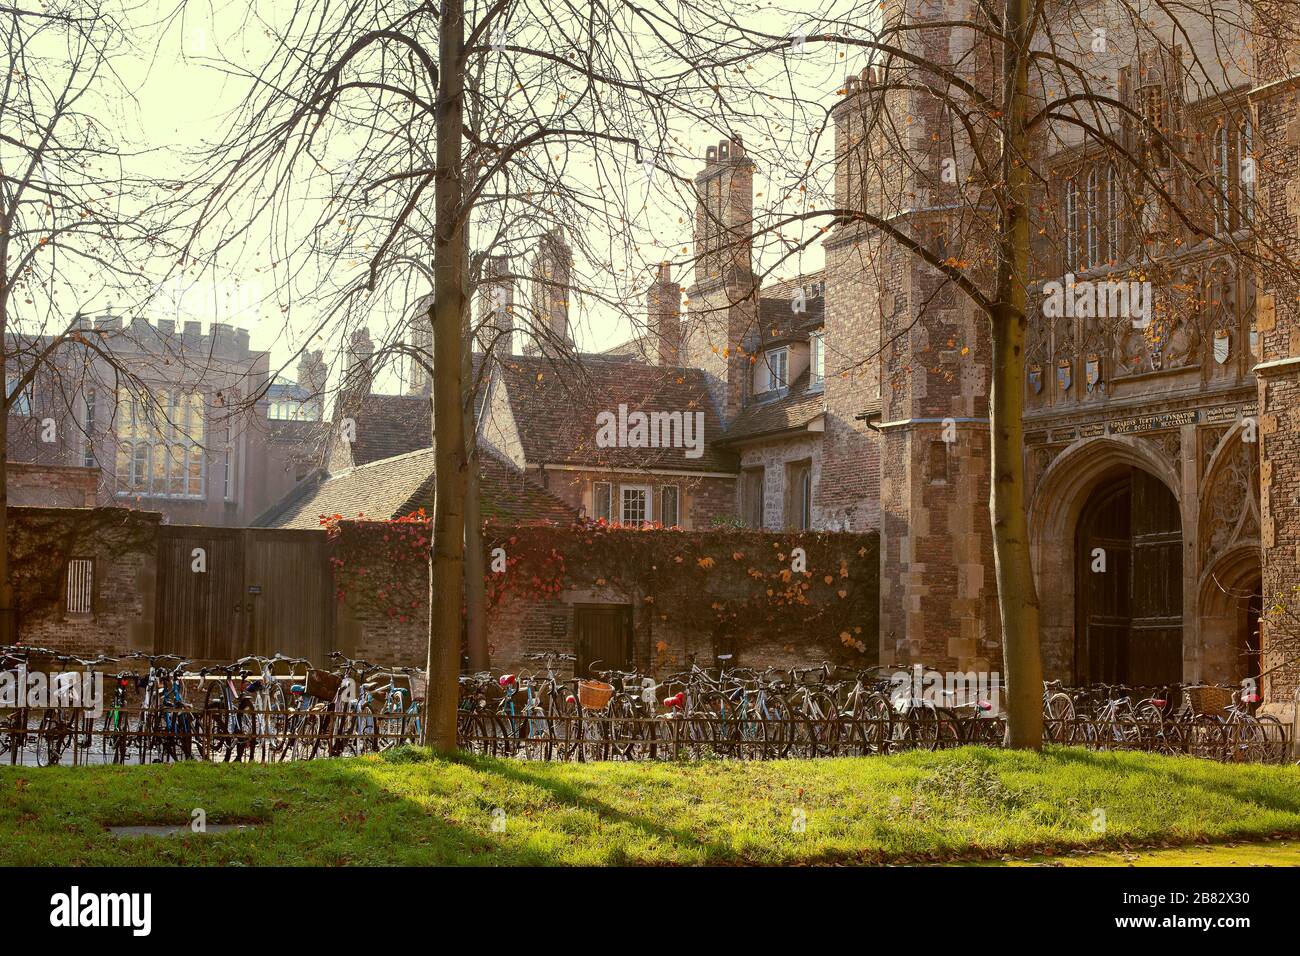 Bicycles parked in front of building, Cambridge University, England, United Kingdom Stock Photo